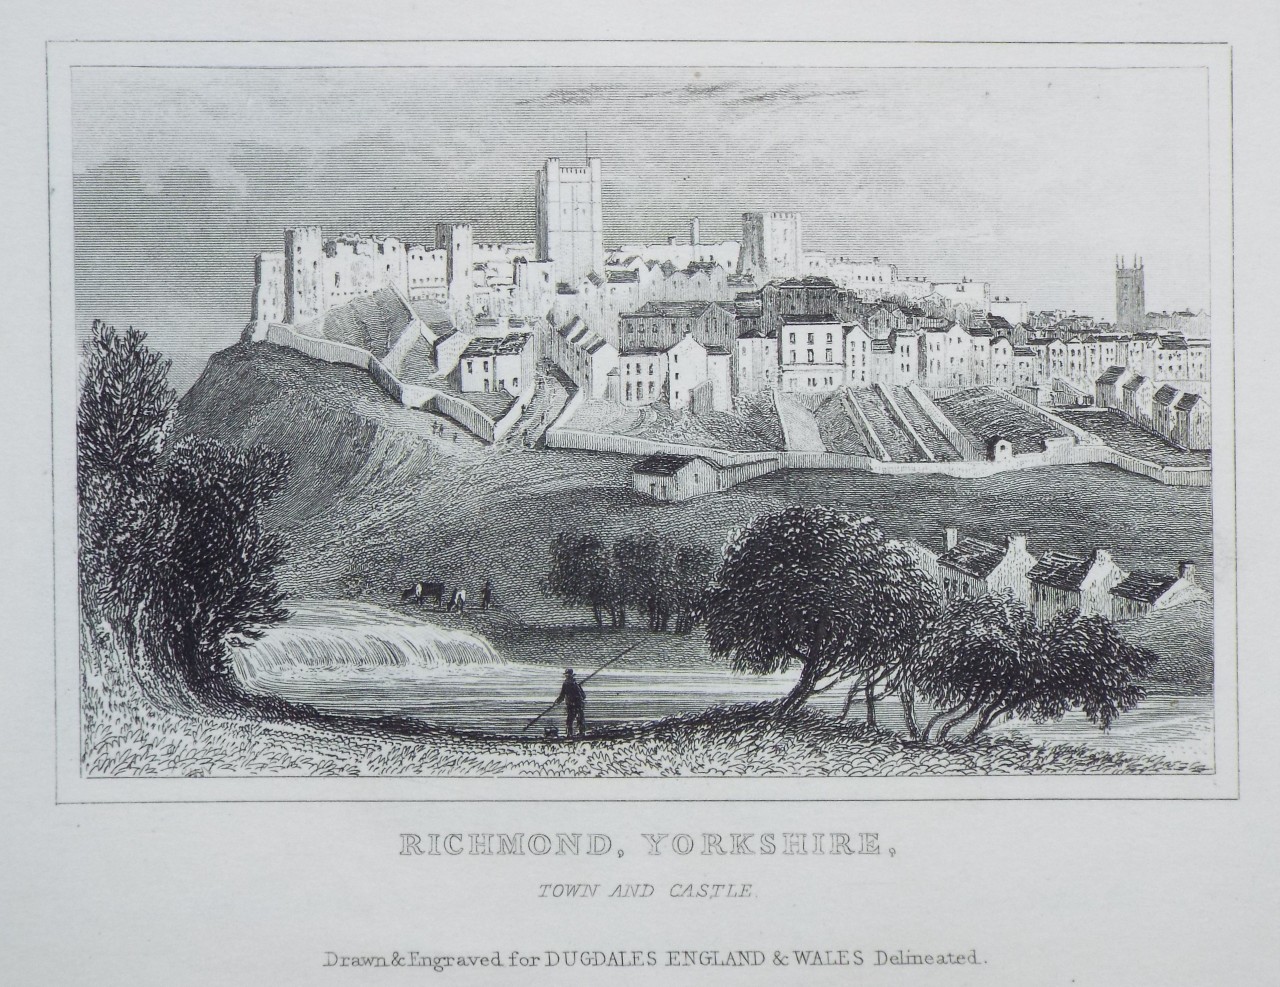 Print - Richmond, Yorkshire, Town and Castle.